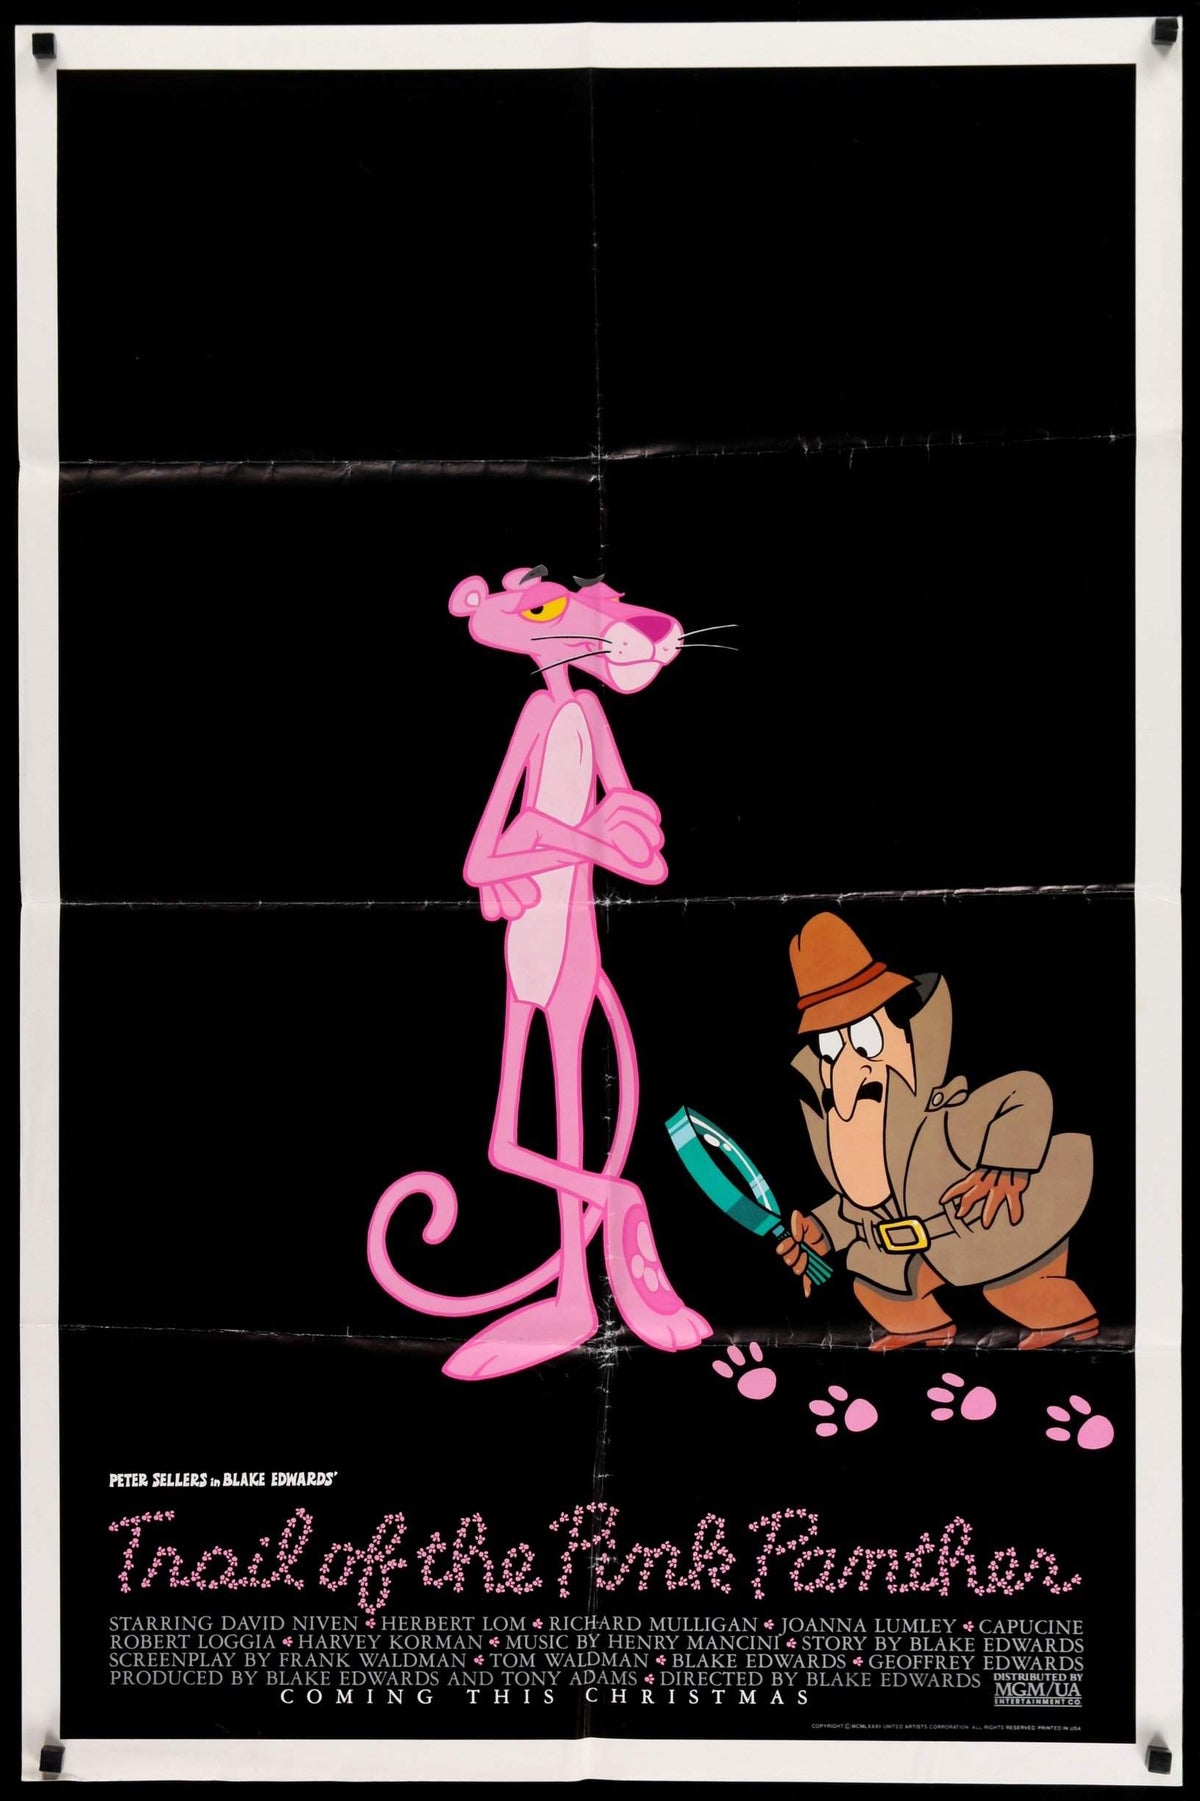 Trail of the Pink Panther (1982) original movie poster for sale at Original Film Art